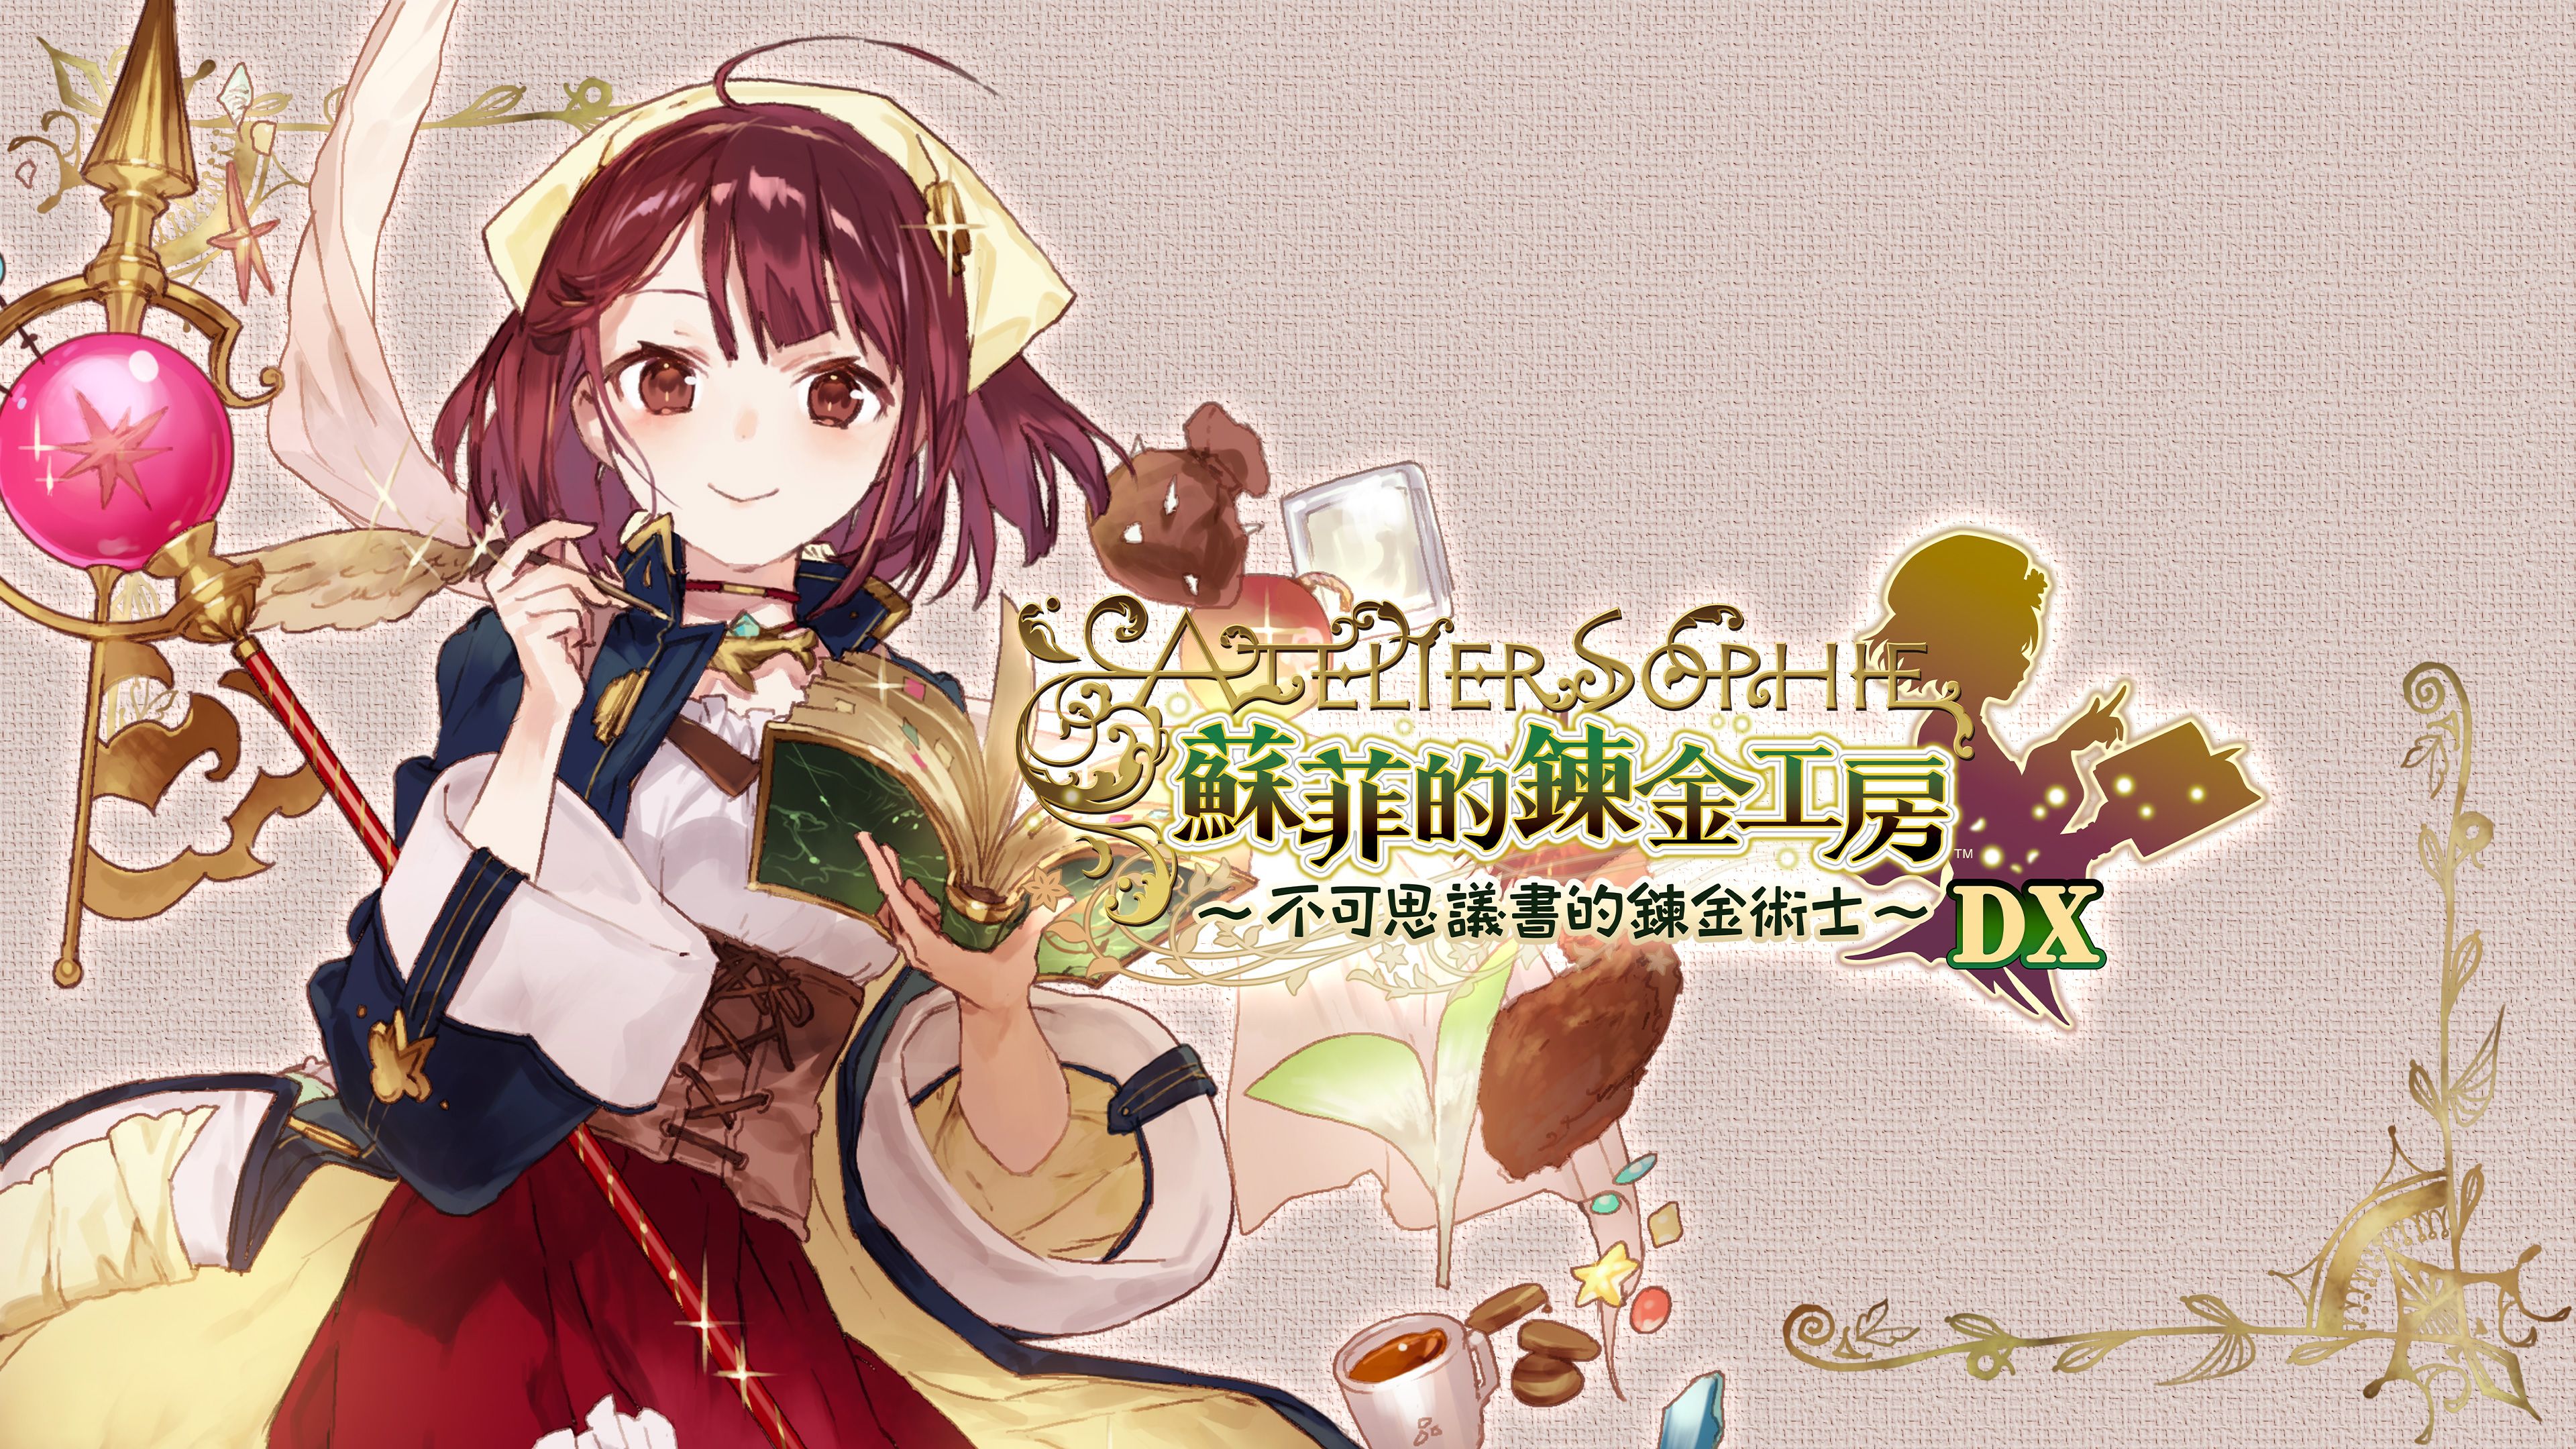 Atelier Sophie: The Alchemist of the Mysterious Book DX (Simplified Chinese, English, Traditional Chinese)